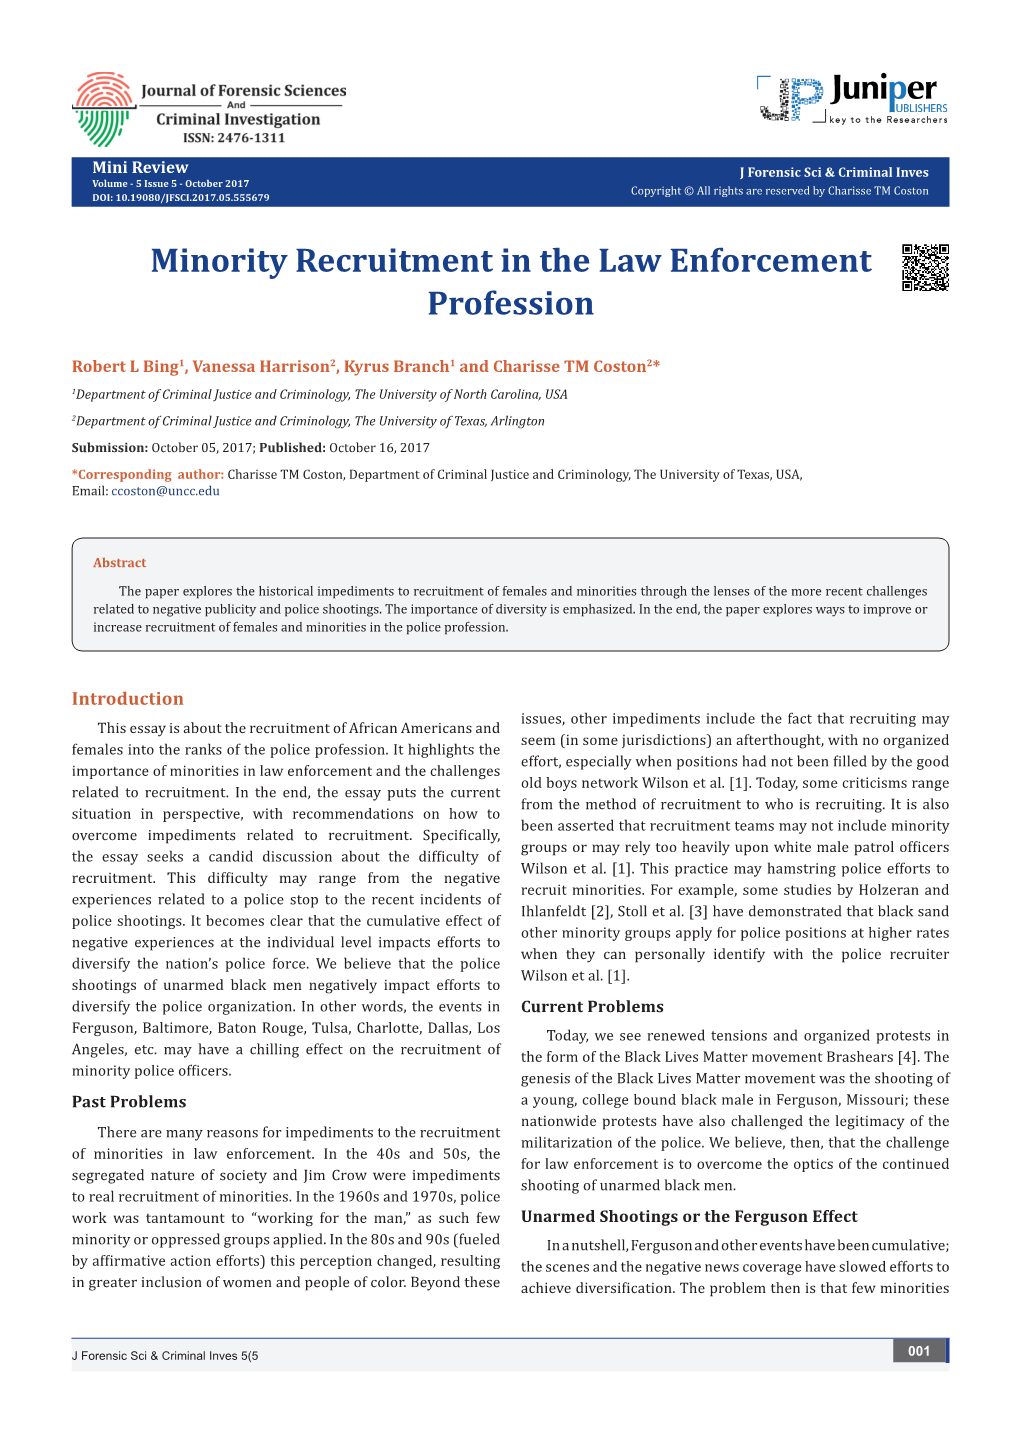 Minority Recruitment in the Law Enforcement Profession